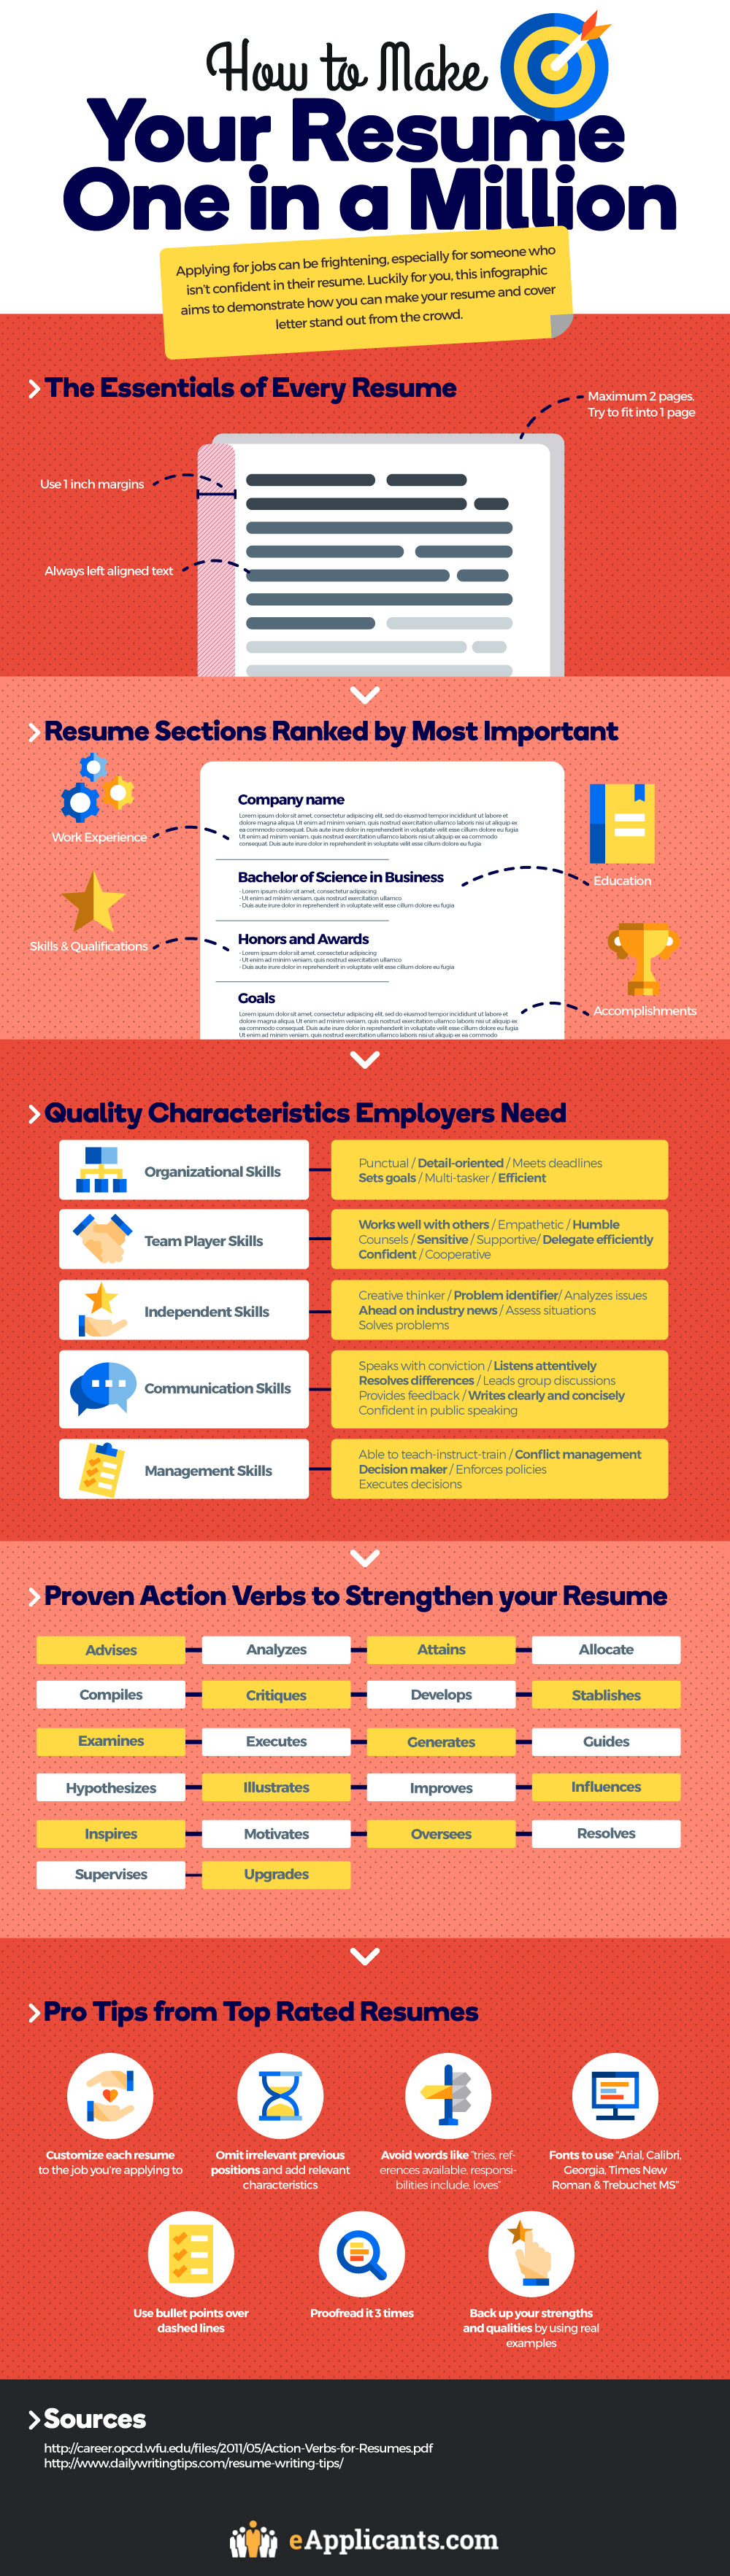 Improve Your Resume With This Online Cheat Sheet